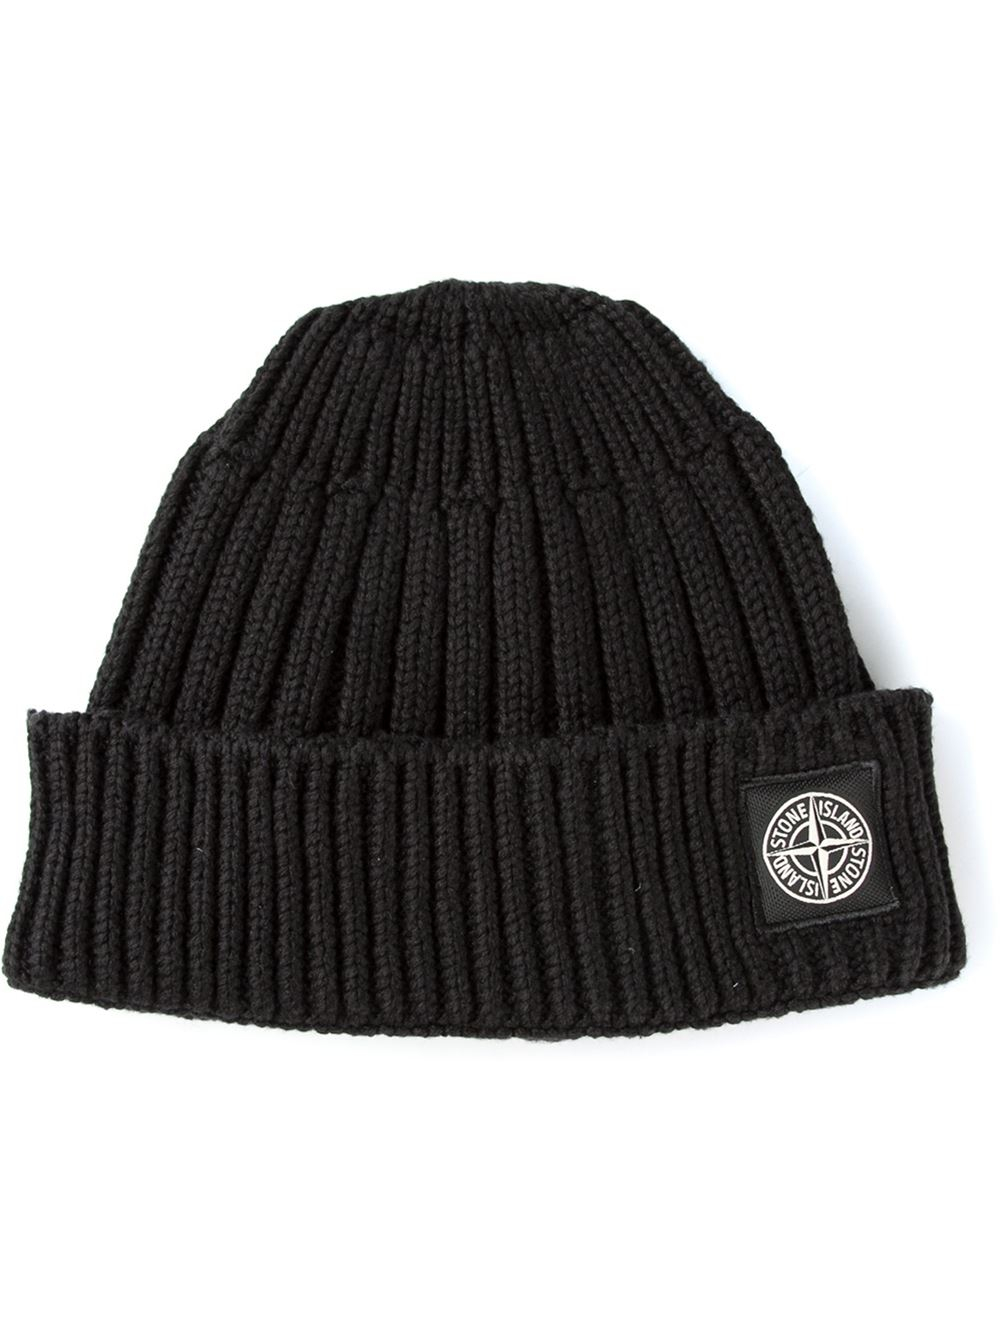 Stone Island Ribbed Beanie Hat in Black for Men - Lyst